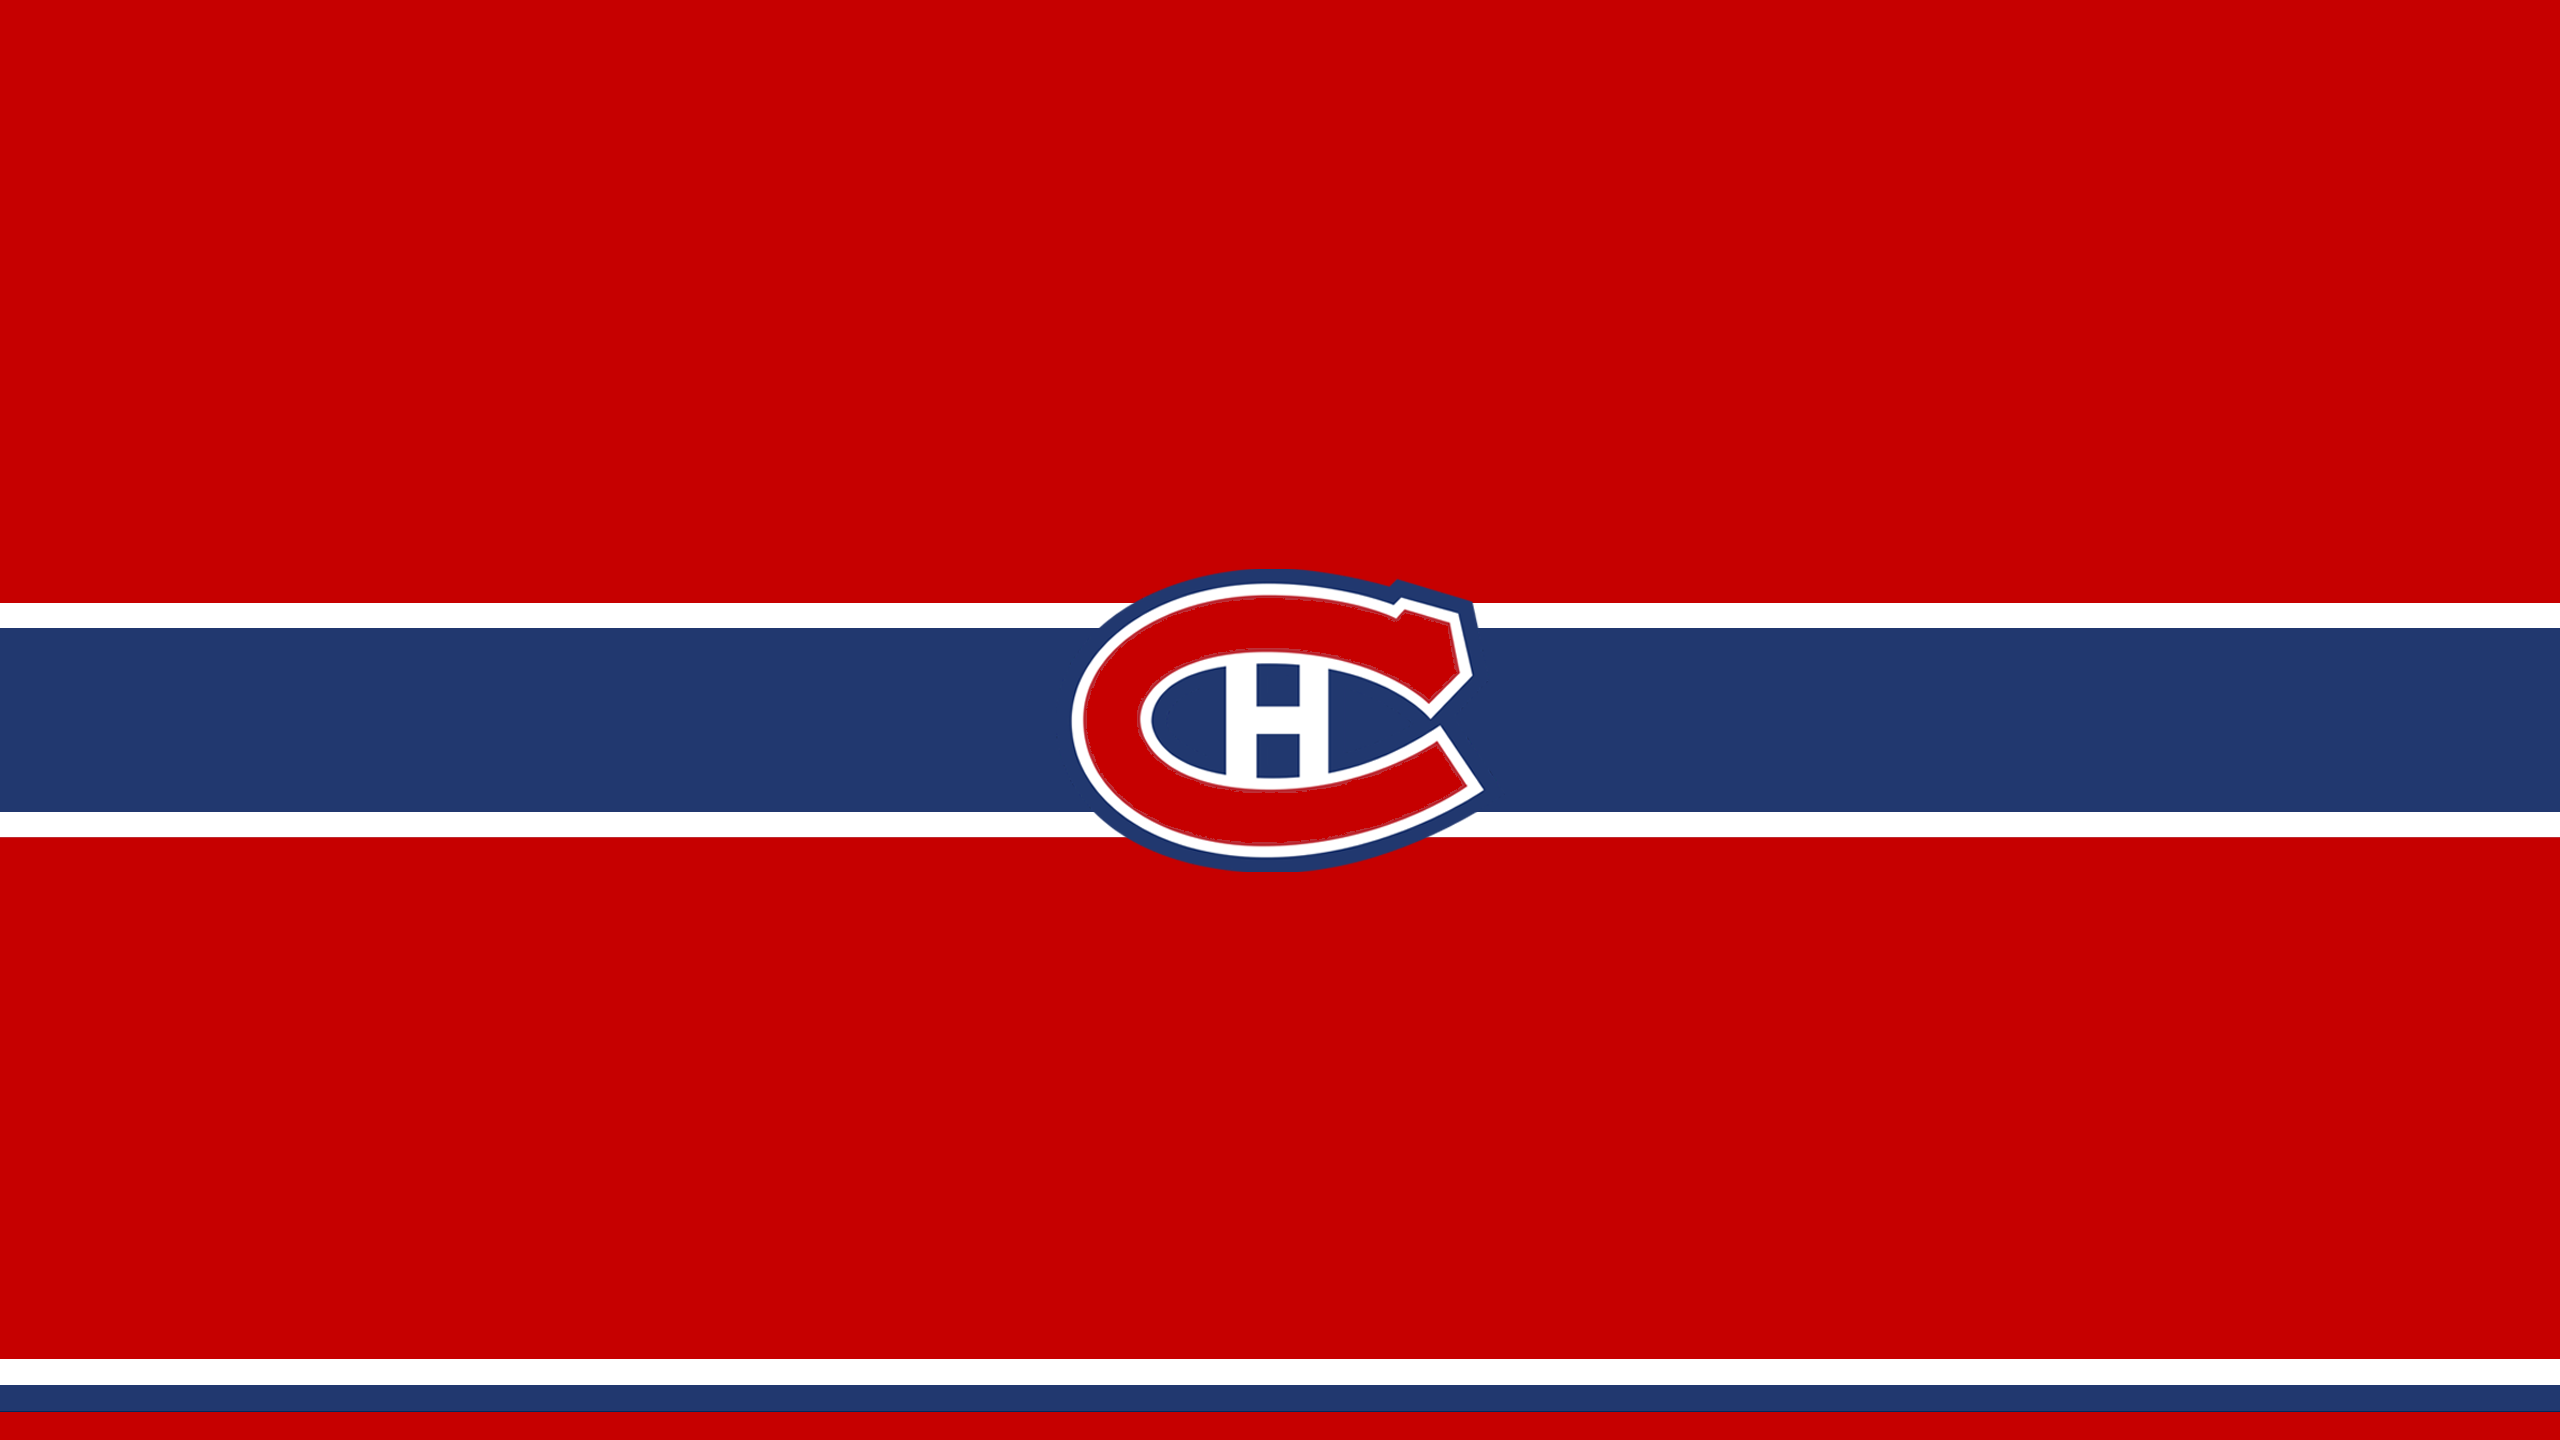 Montreal Canadiens - NHL - Square Bettor